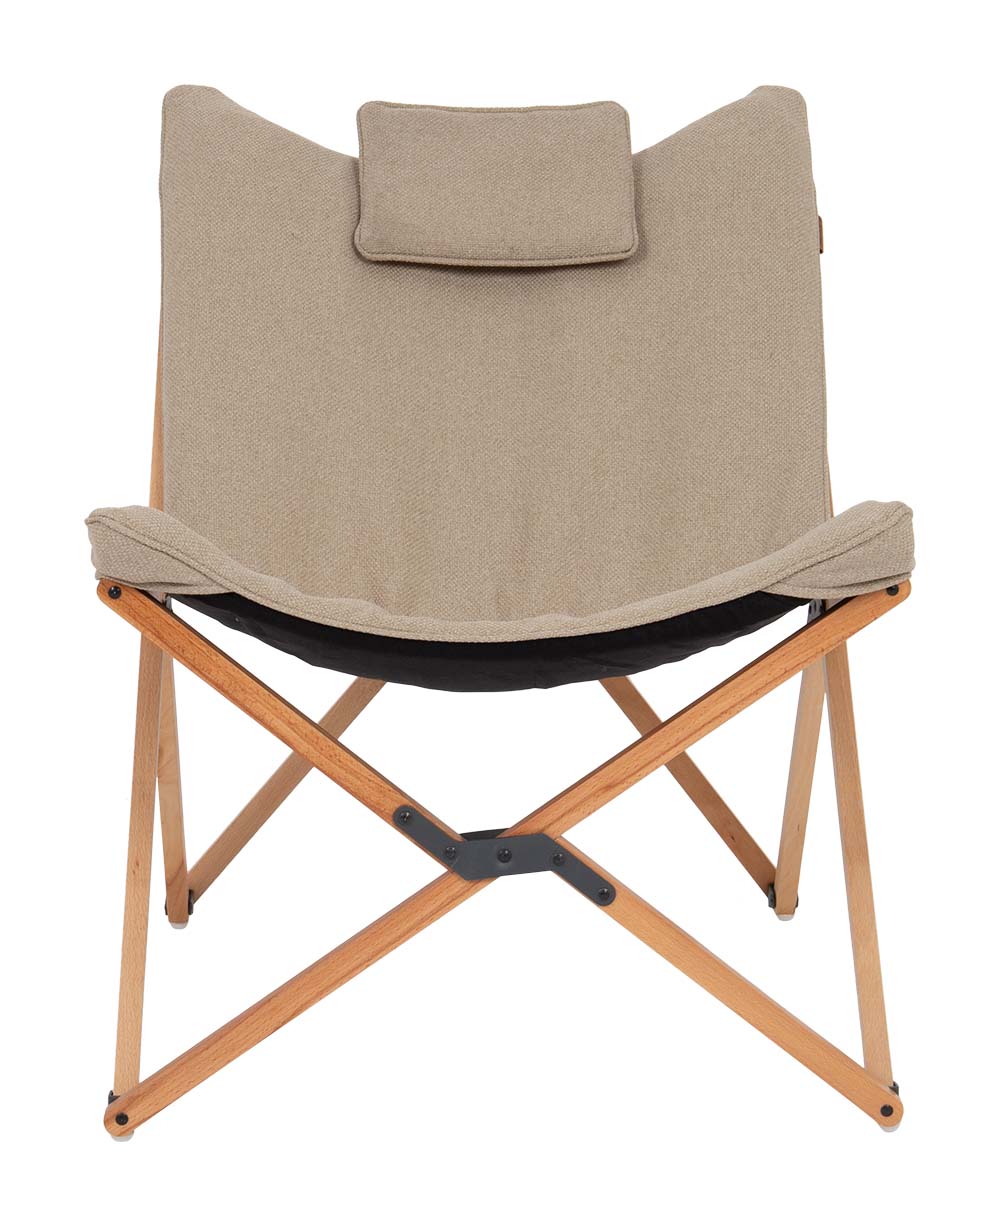 Bo-Camp - Urban Outdoor collection - Relax chair - Wembley - M - Nika - Beige detail 2